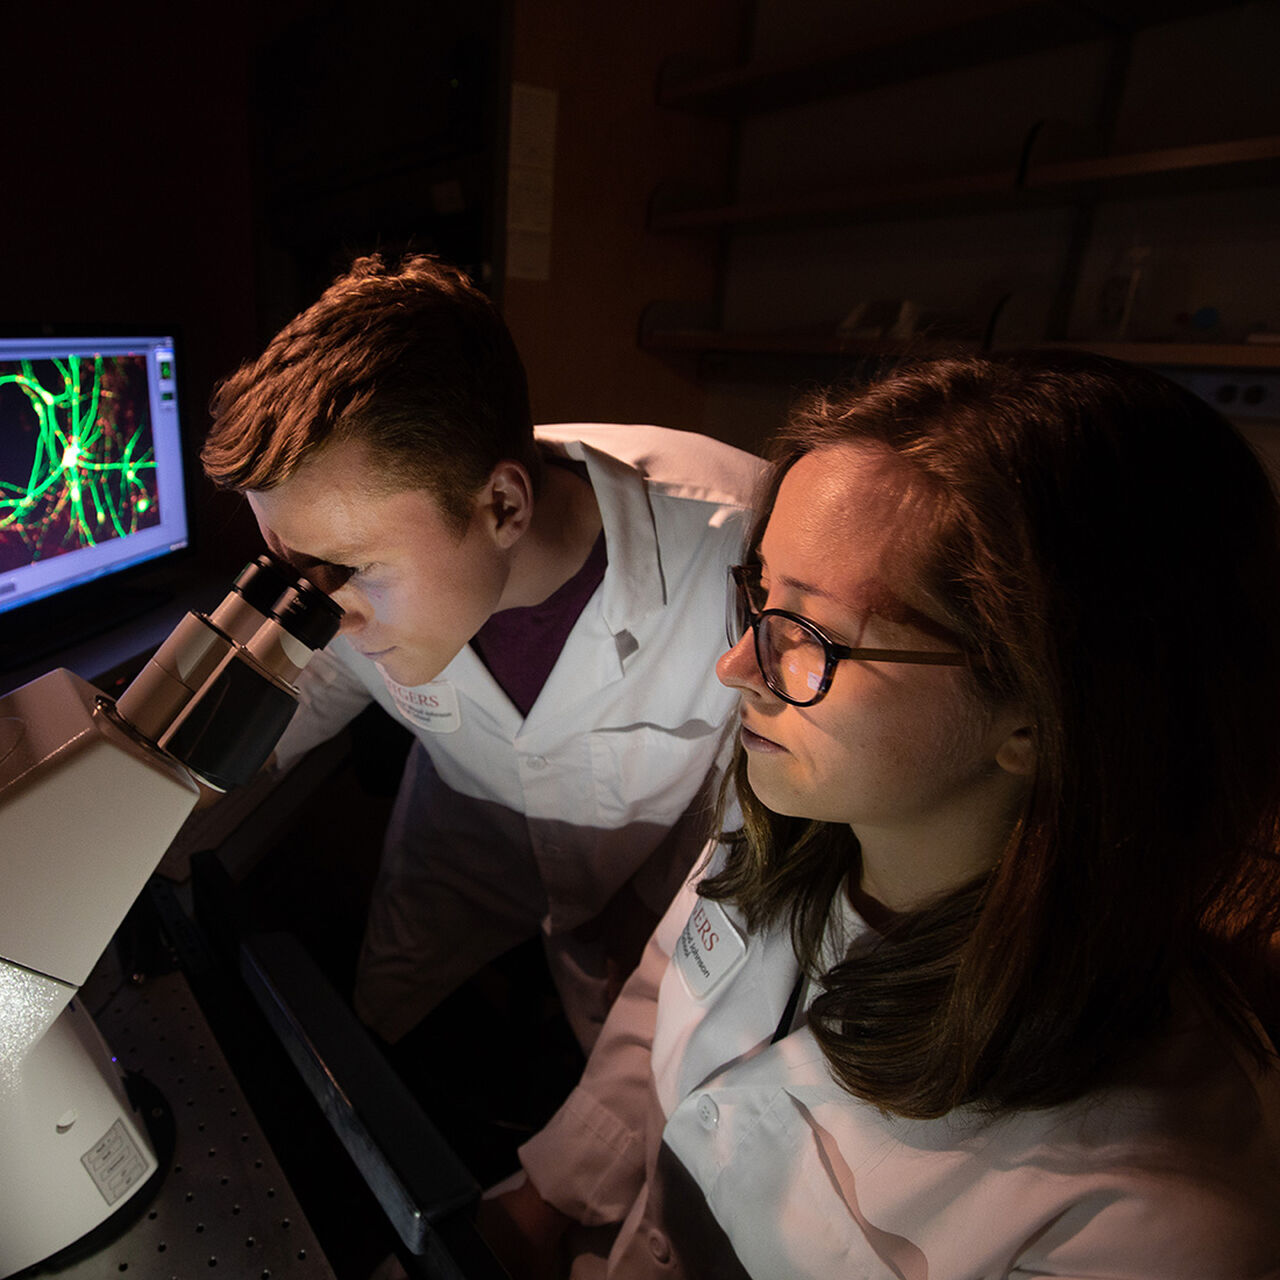 Two researchers in lab coats working at an electronic microscope in the dark  image number 0